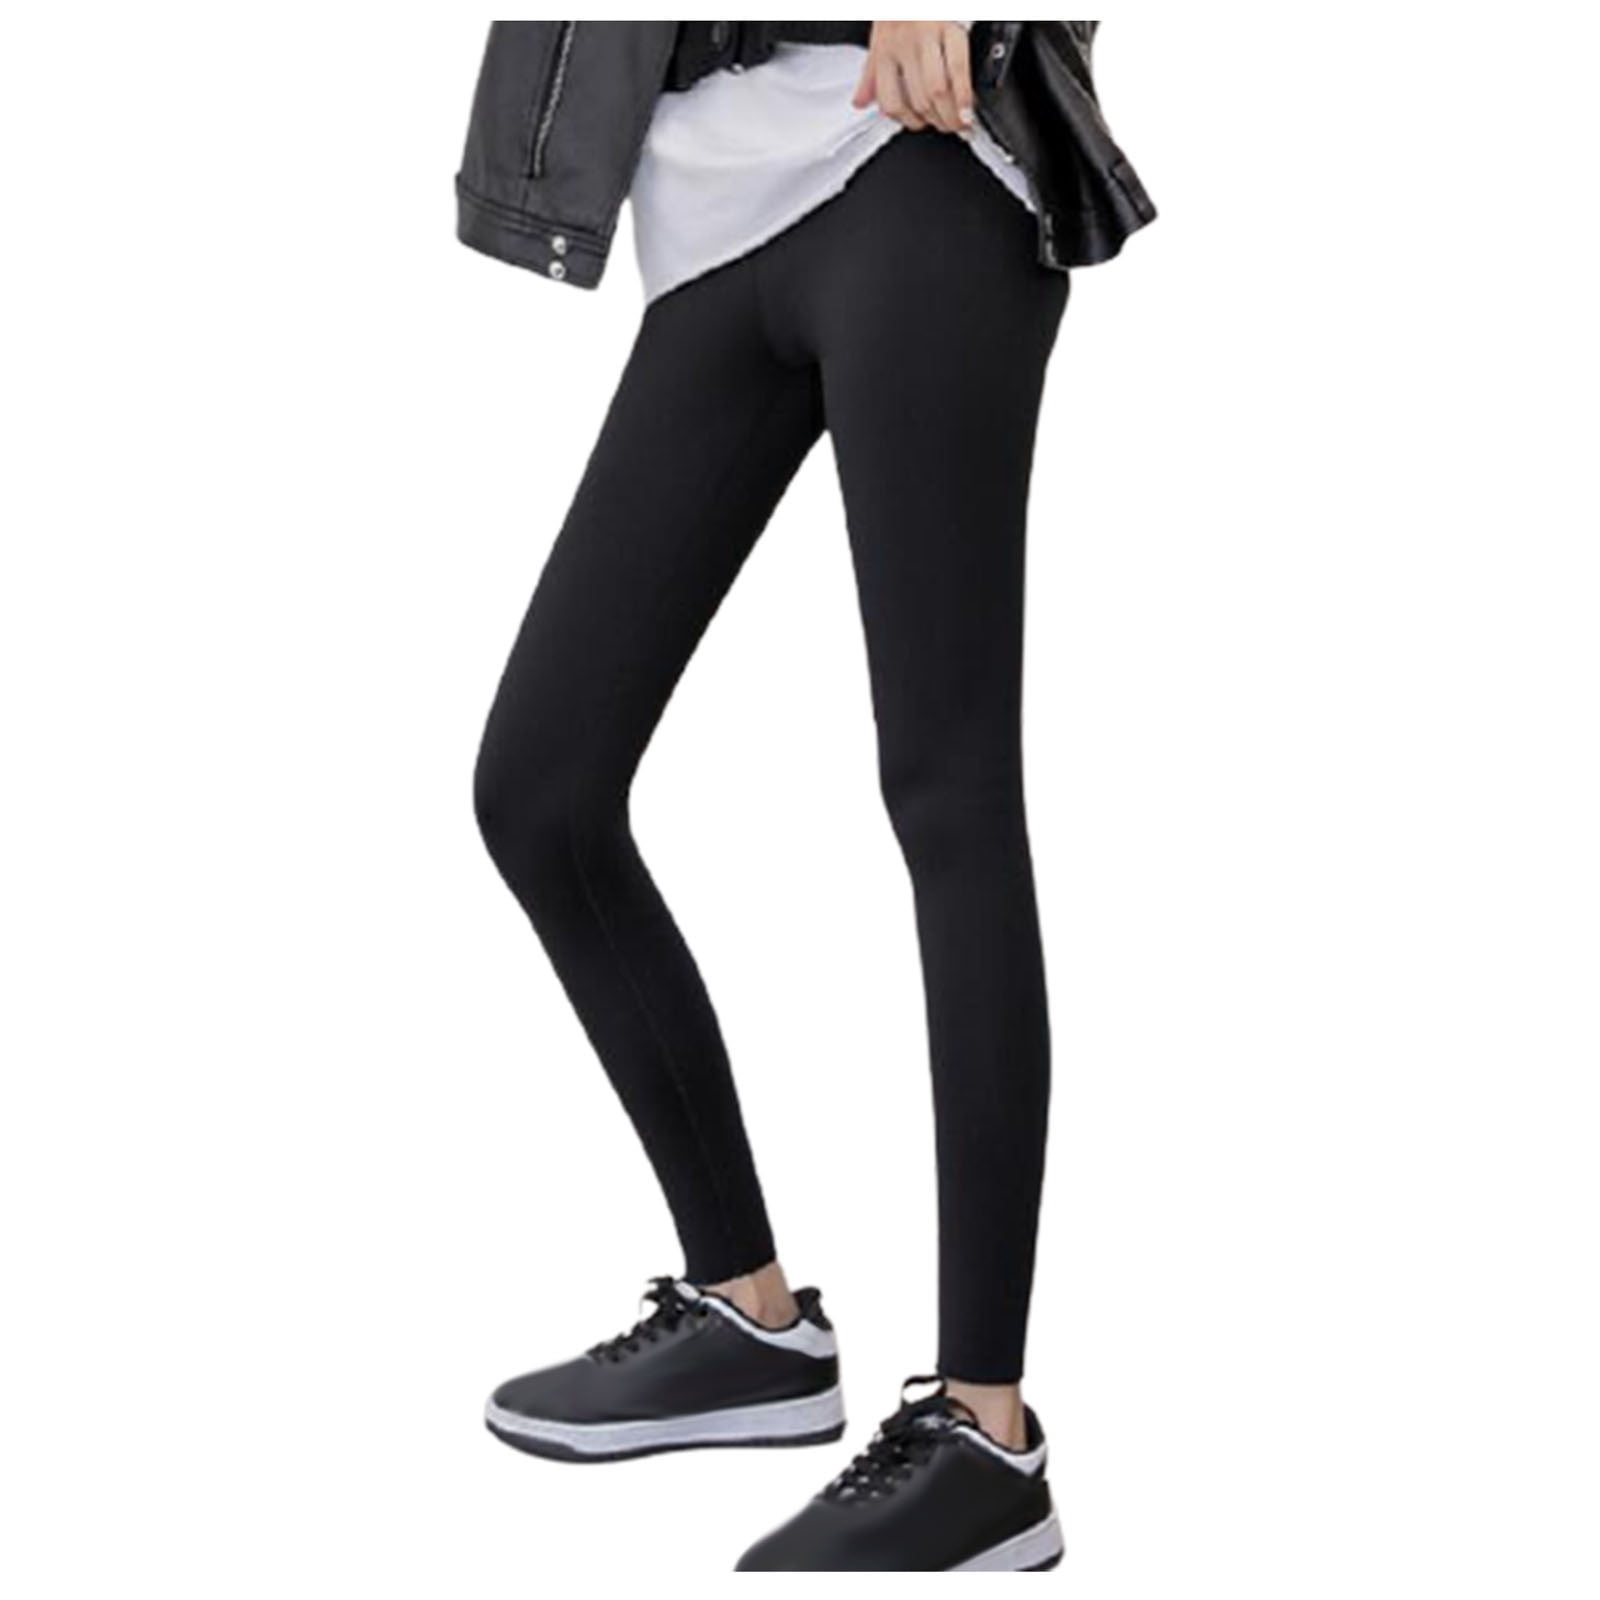 Fall Savings Clearance Deals ! BVnarty Discount Leggings for Women Sexy  Tight High Waist Solid Color Comfy Lounge Casual Fashion Fall Winter Long